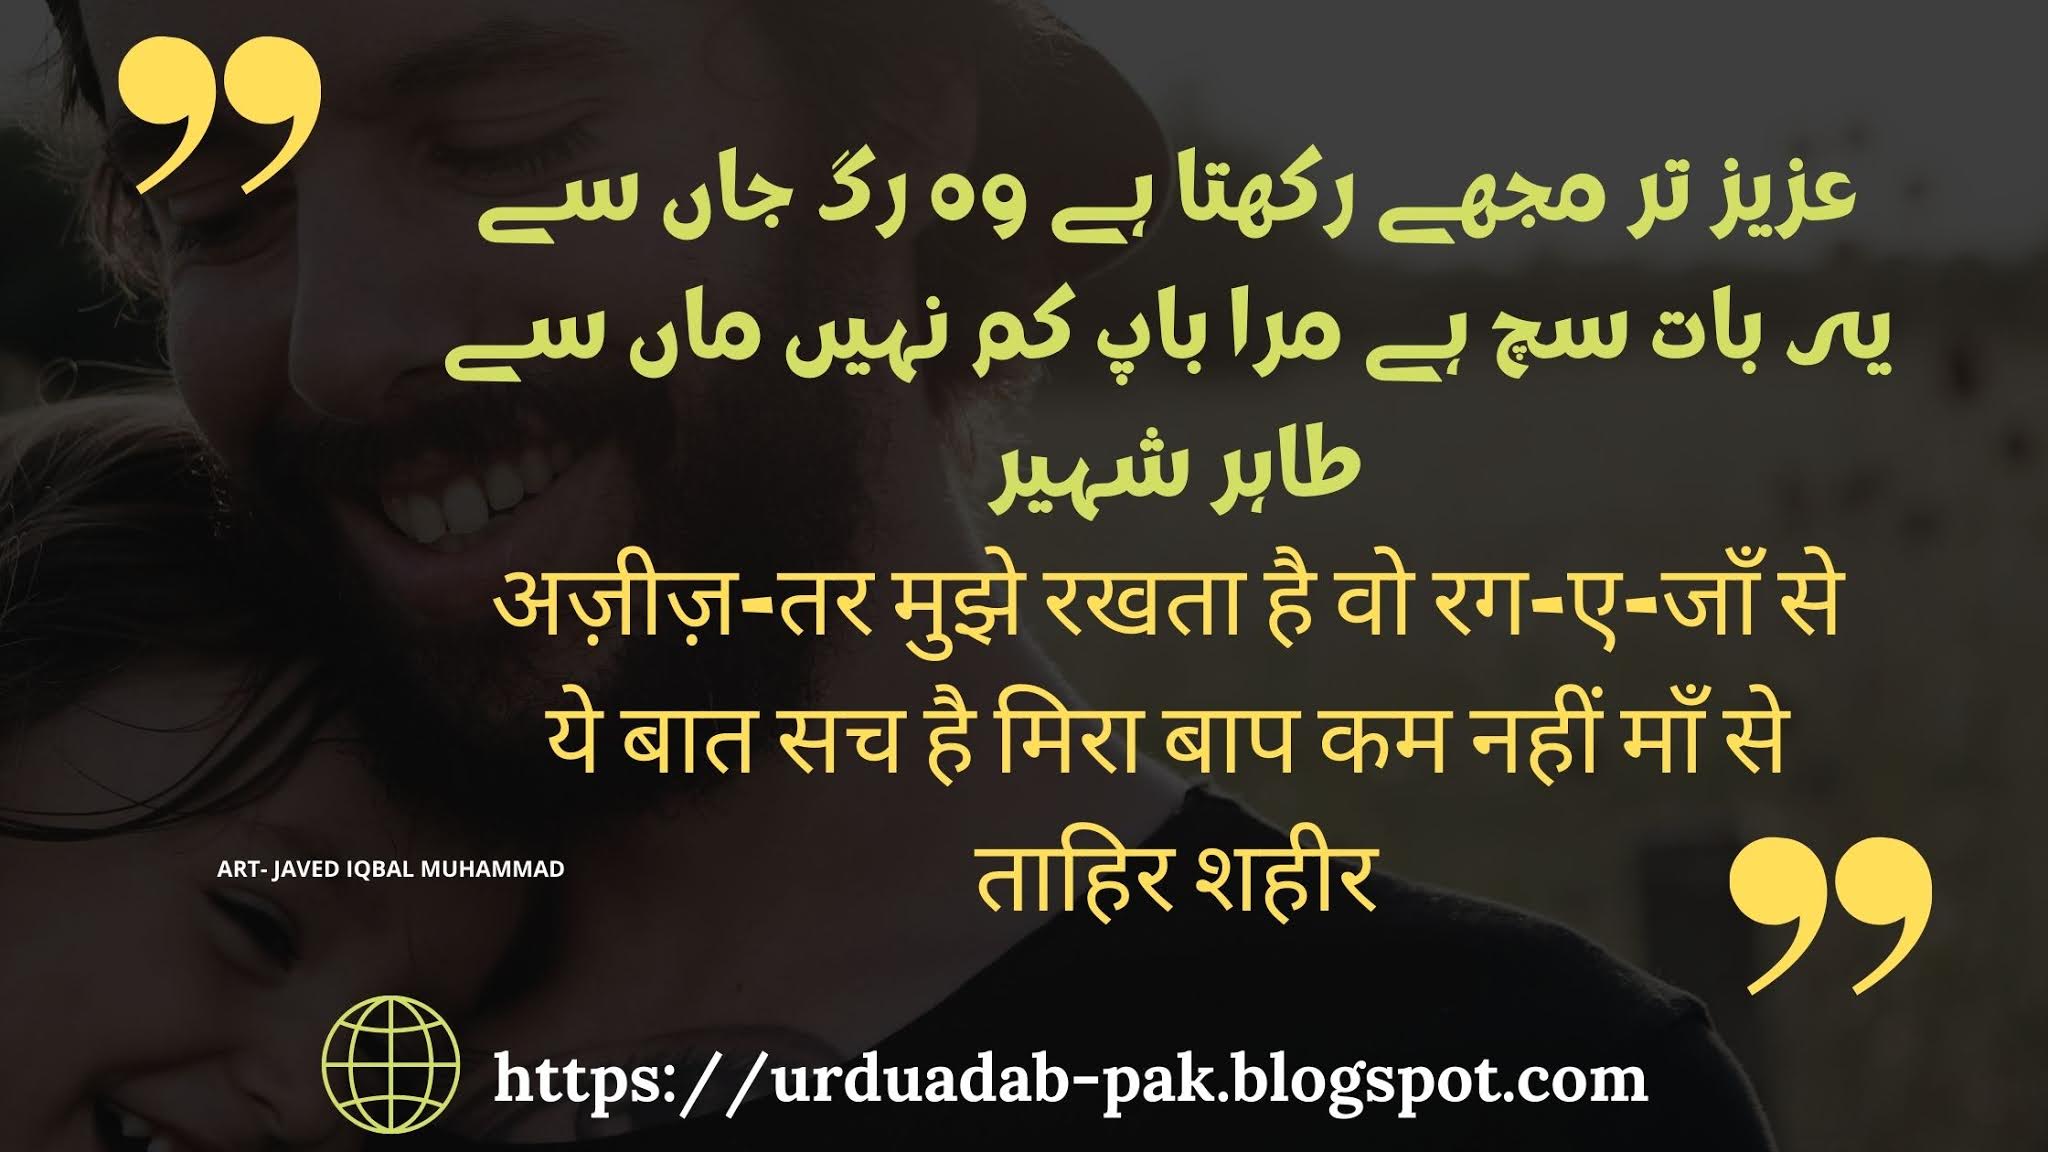 Father-Day-Shayari-Father-Day-Poetry-in-urdu-two-lines-Urdu Poetry-Urdu -Shayari- Best-Poetry-In Urdu-Urdu-Ghazal-Hindi Shayari-love poetry-sad-poetry